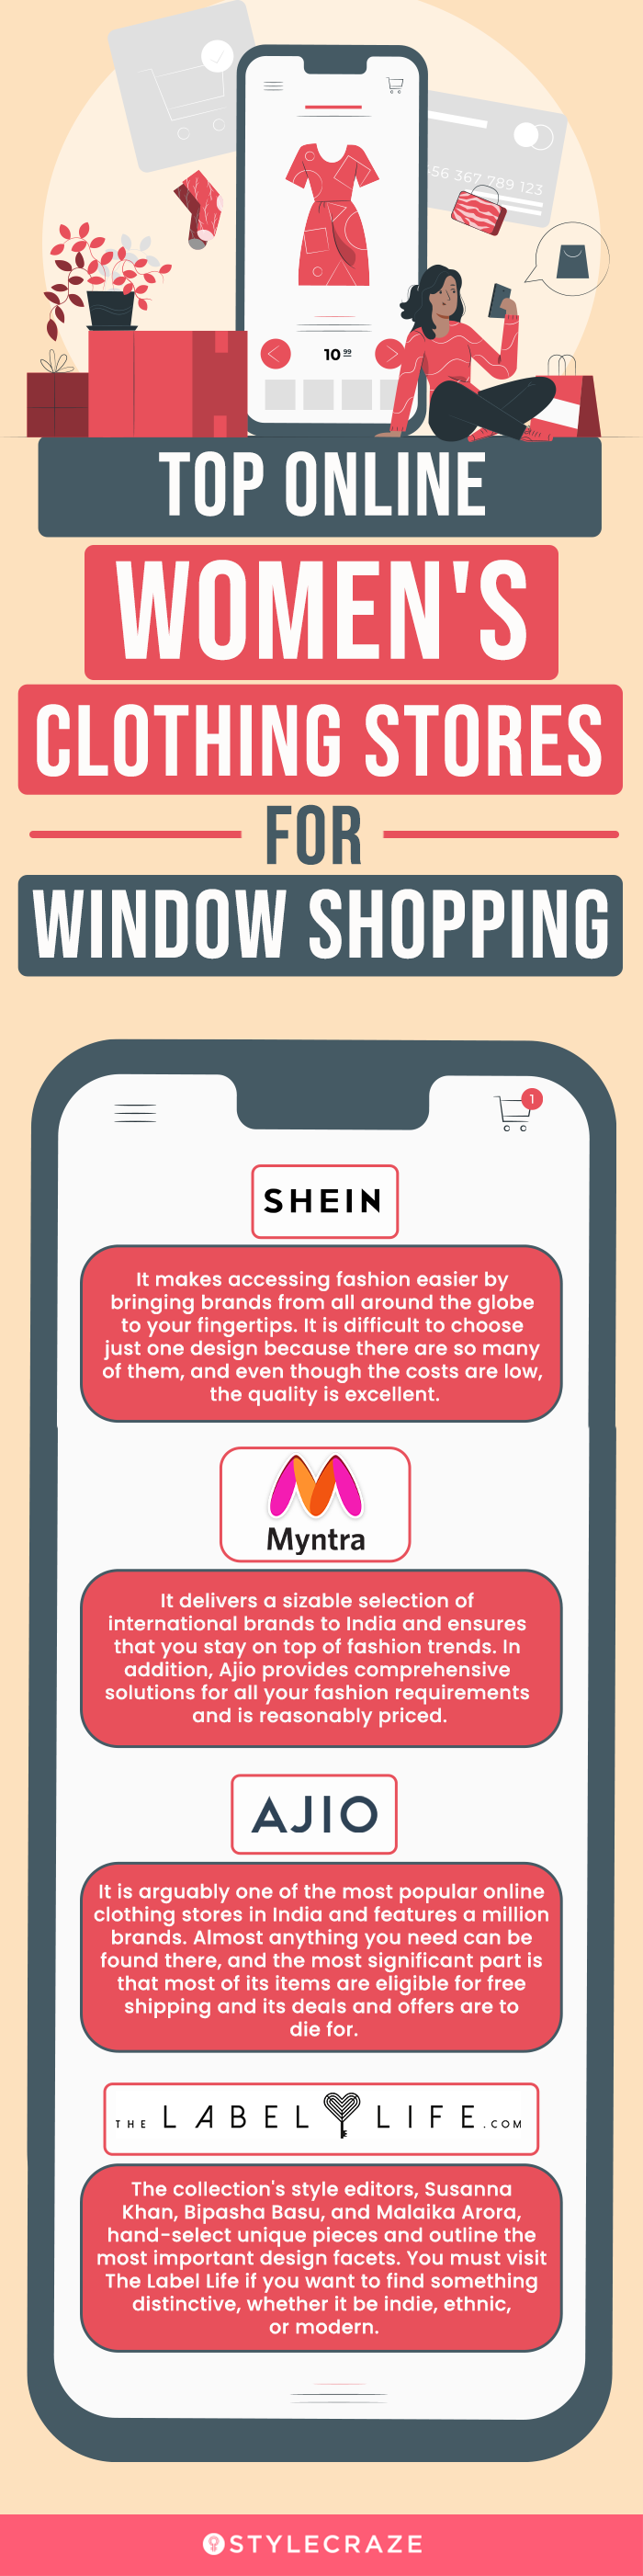 top online women's clothing stores for window shopping (infographic)